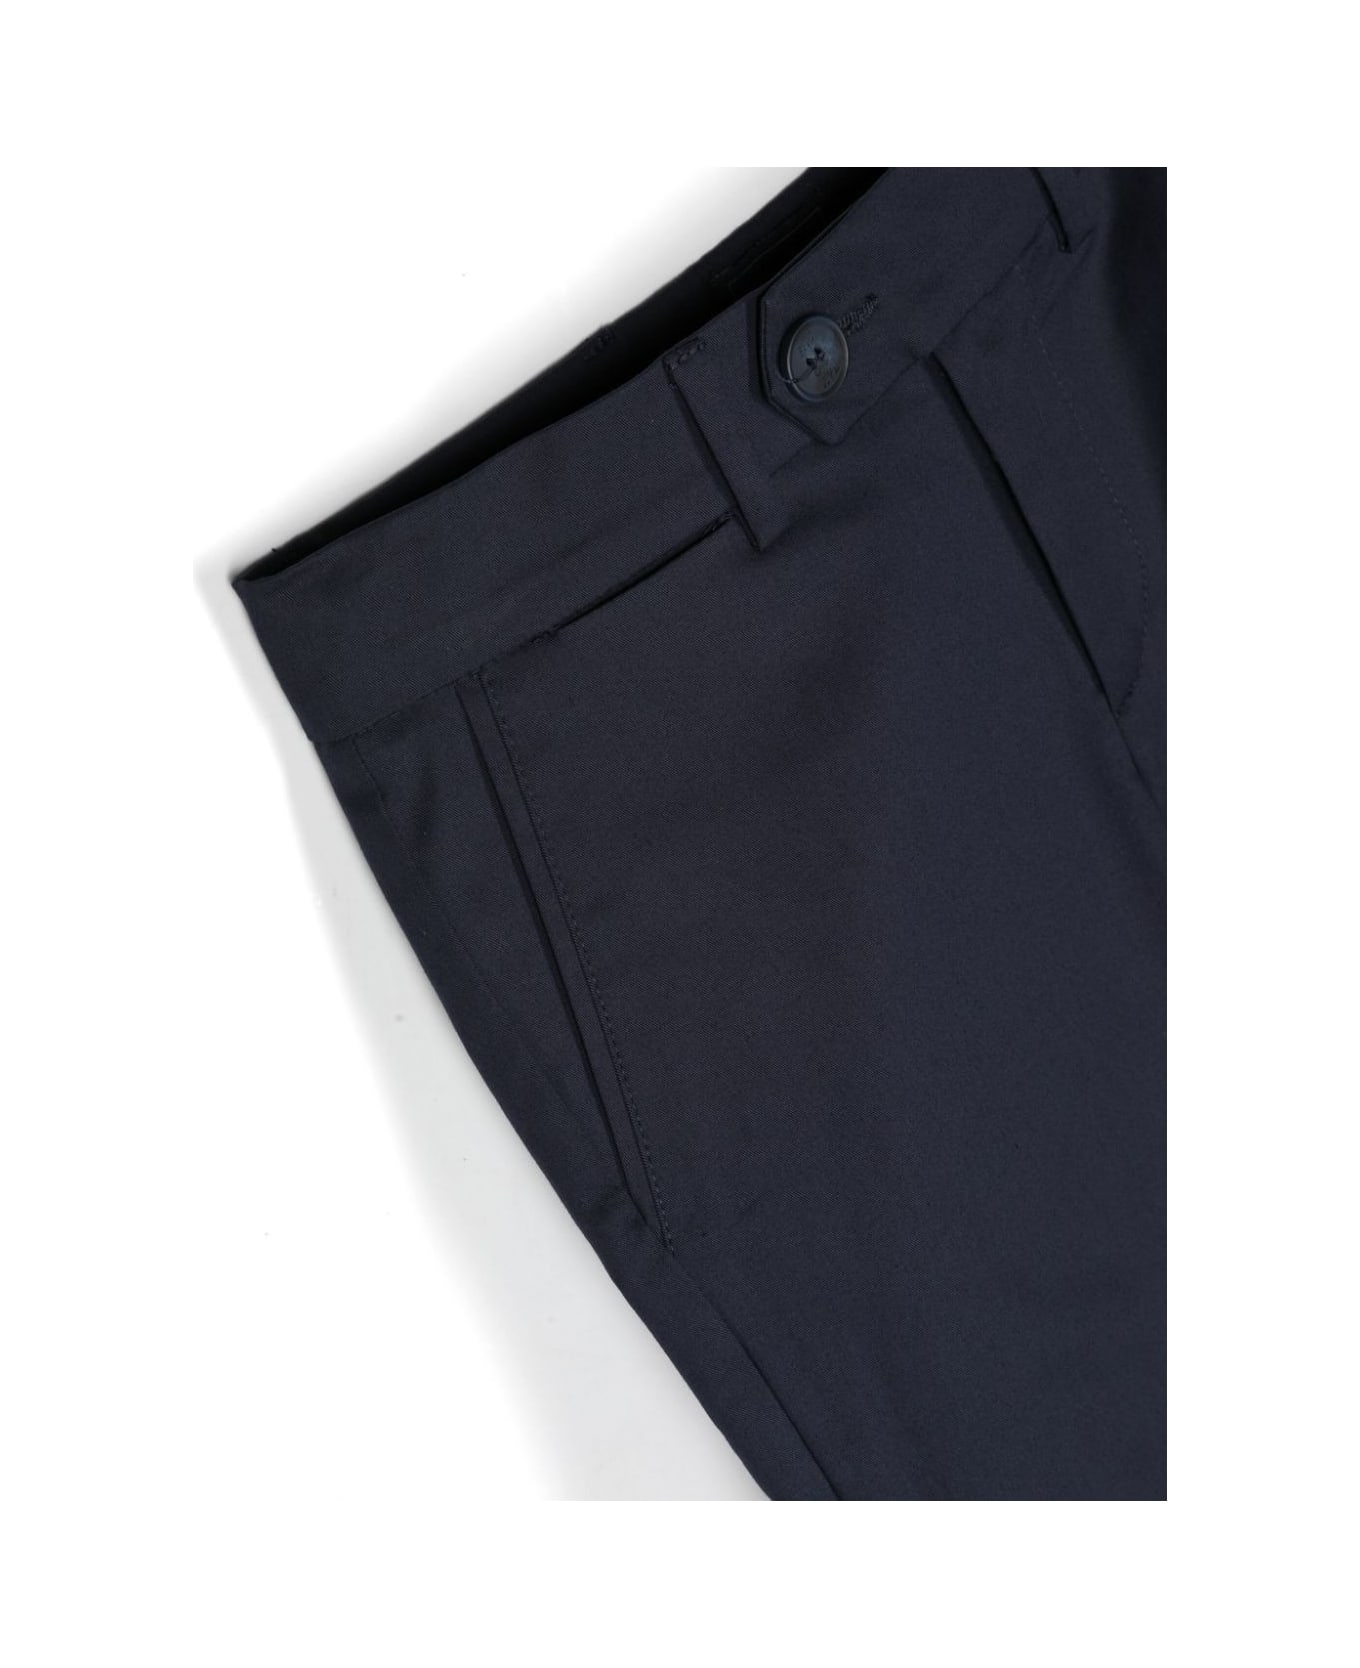 Fay Navy Blue Cotton Blend Tailored Bermuda Shorts - Blue ボトムス